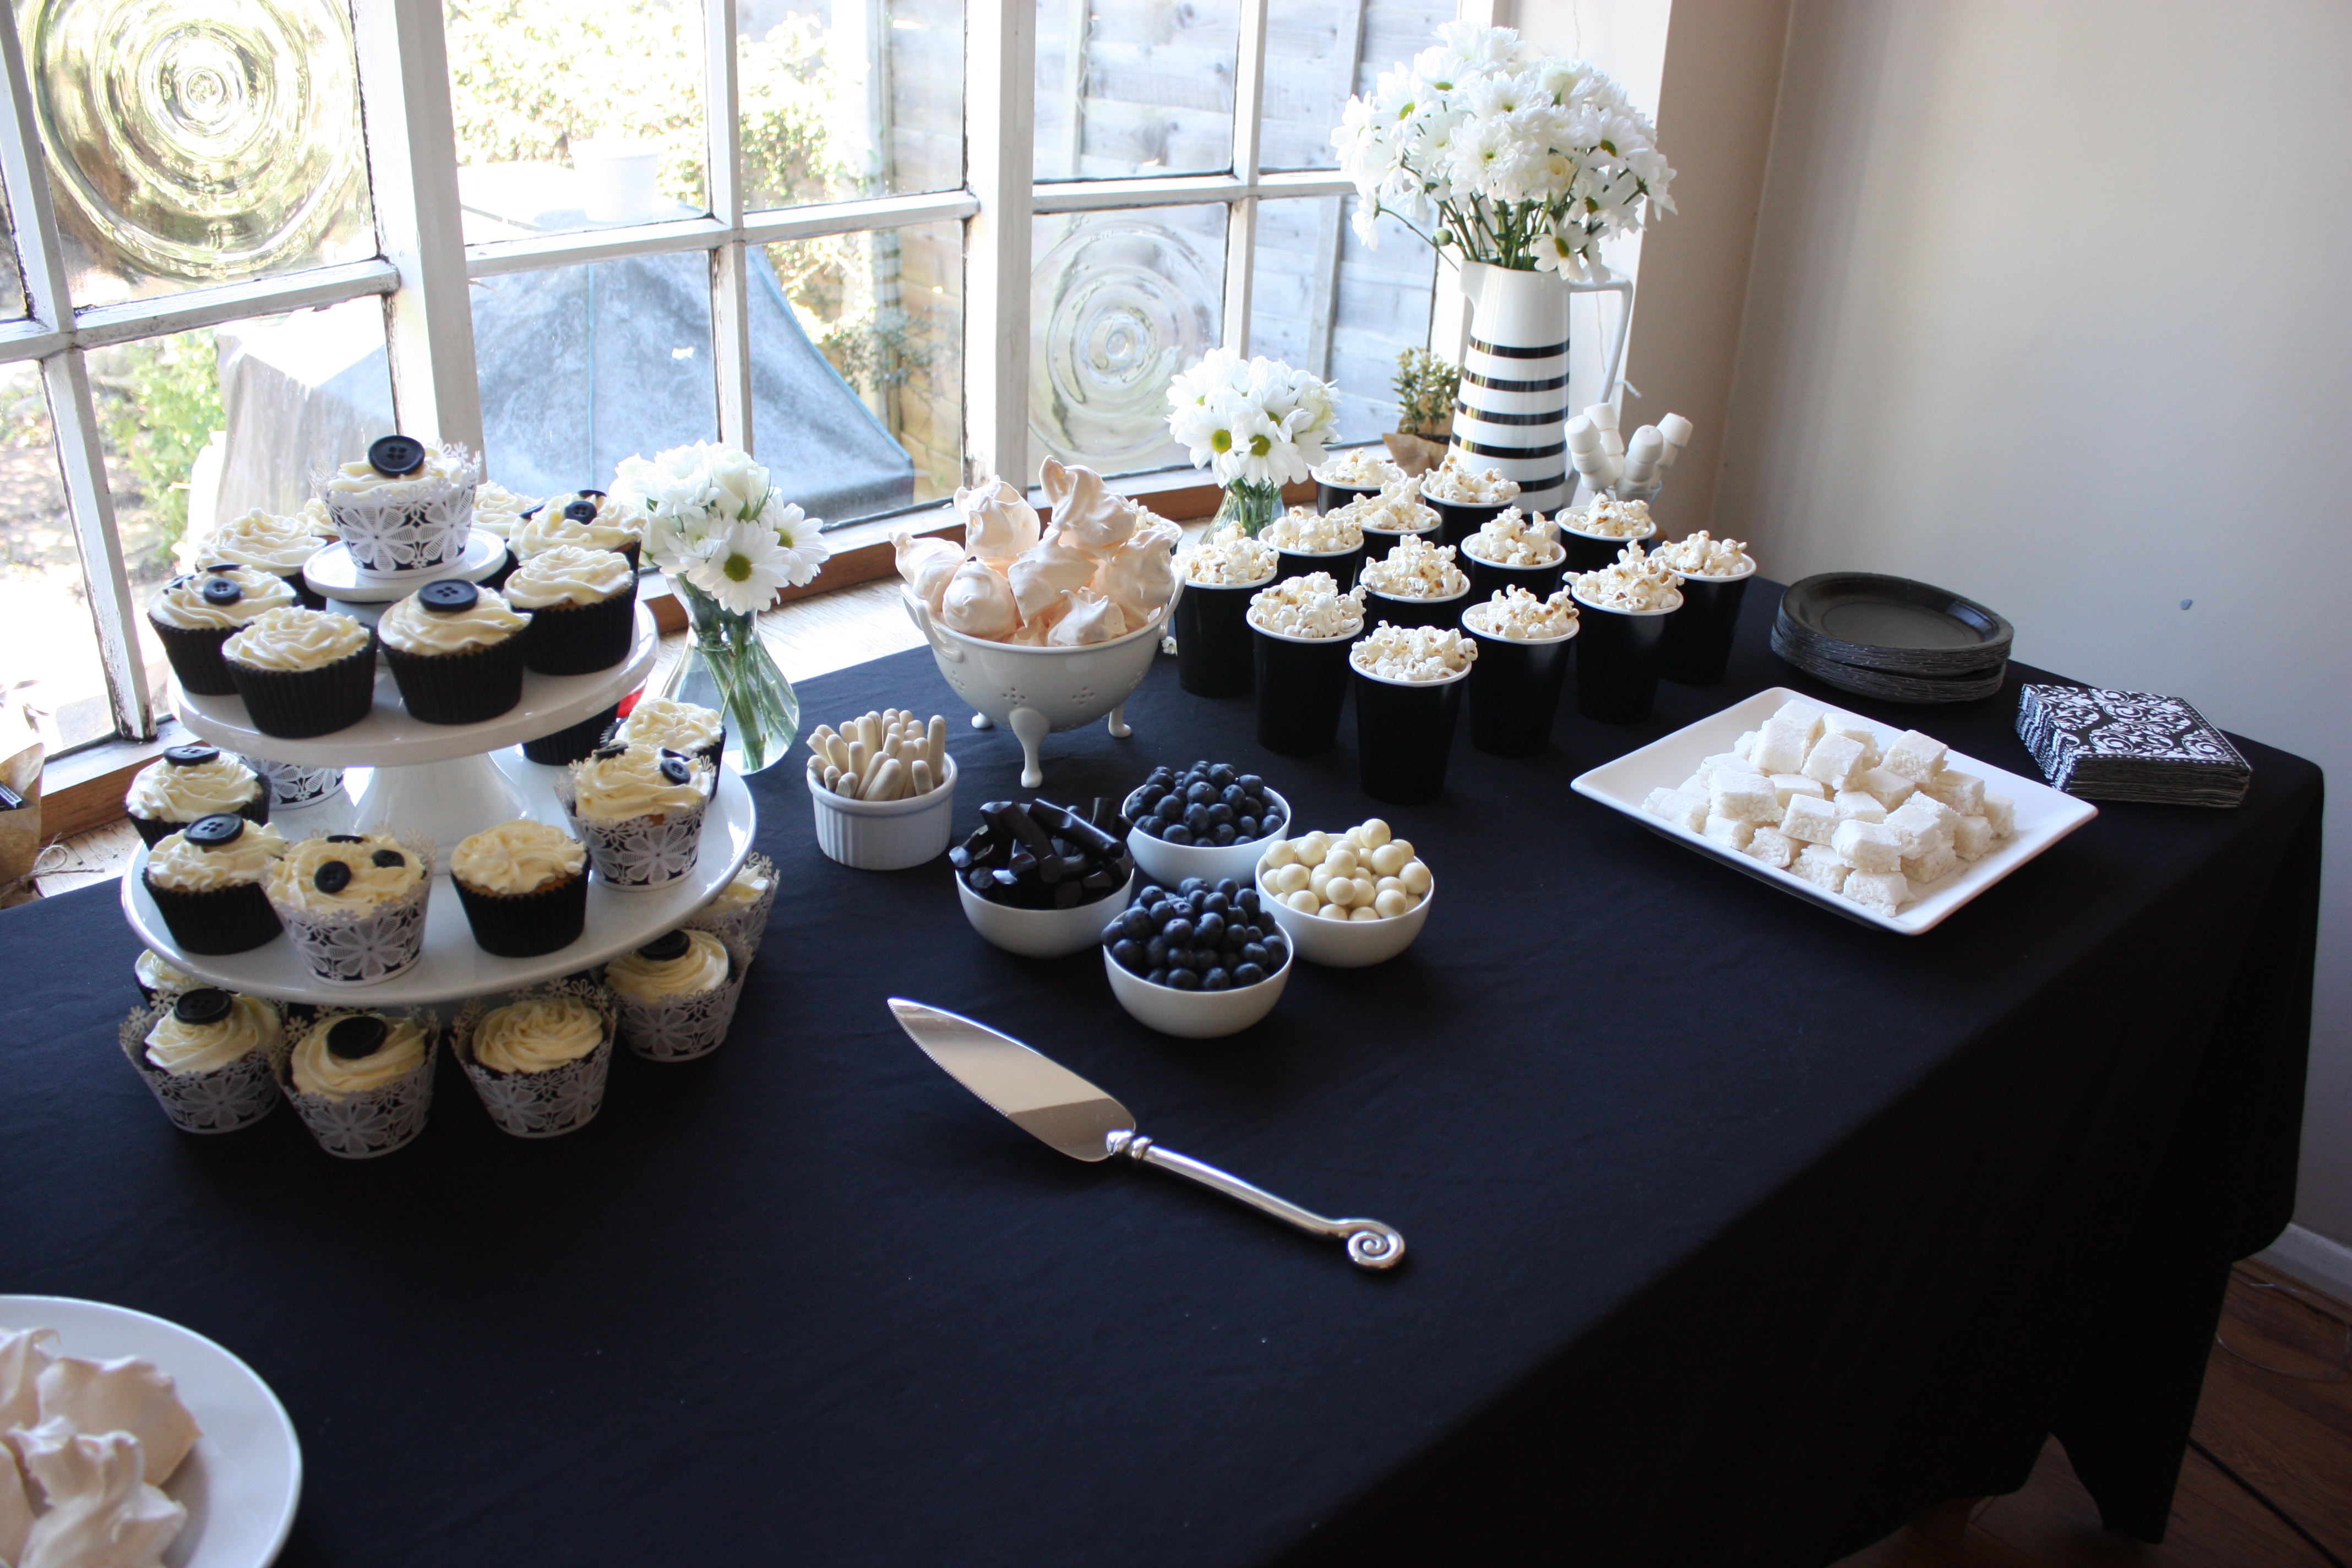  Black  White  Themed Party  More than cupcakes